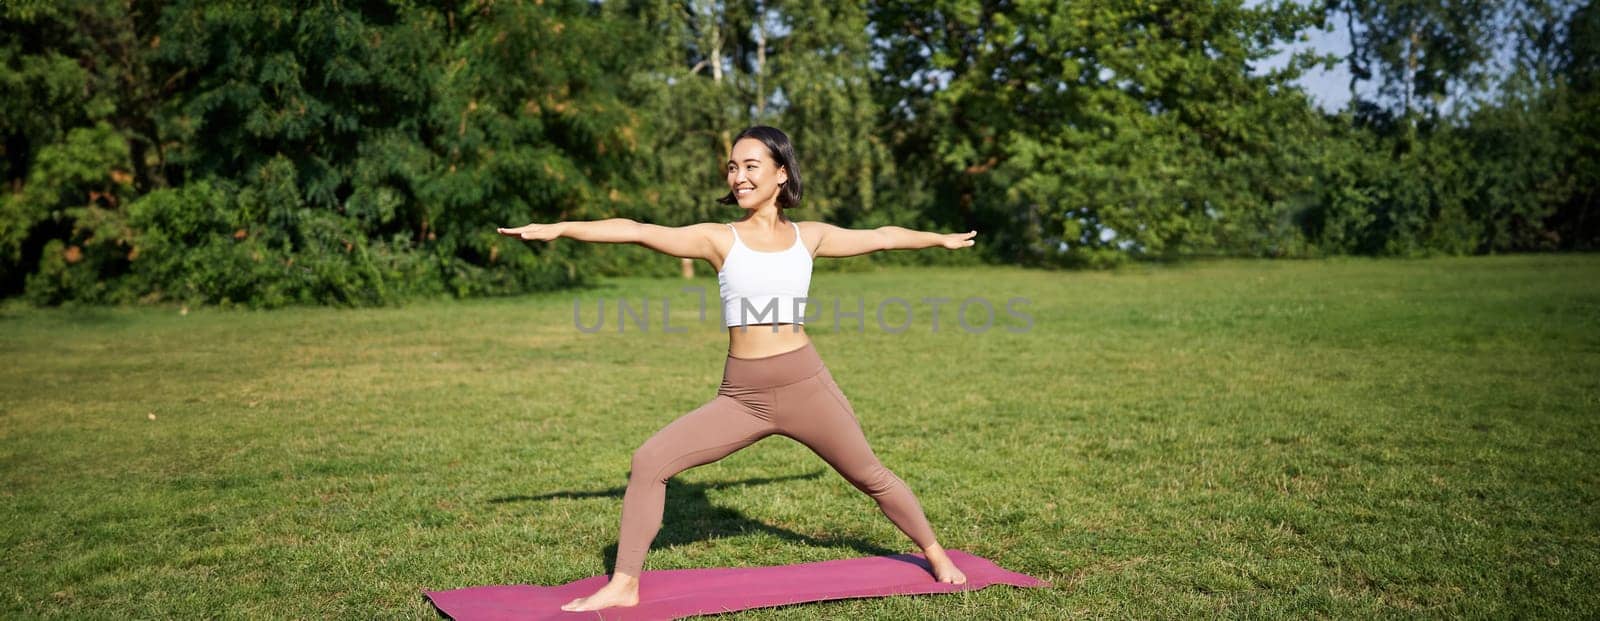 Young woman stretching her body, workout and doing yoga in park, standing on rubber mat in fitness clothing during training session.